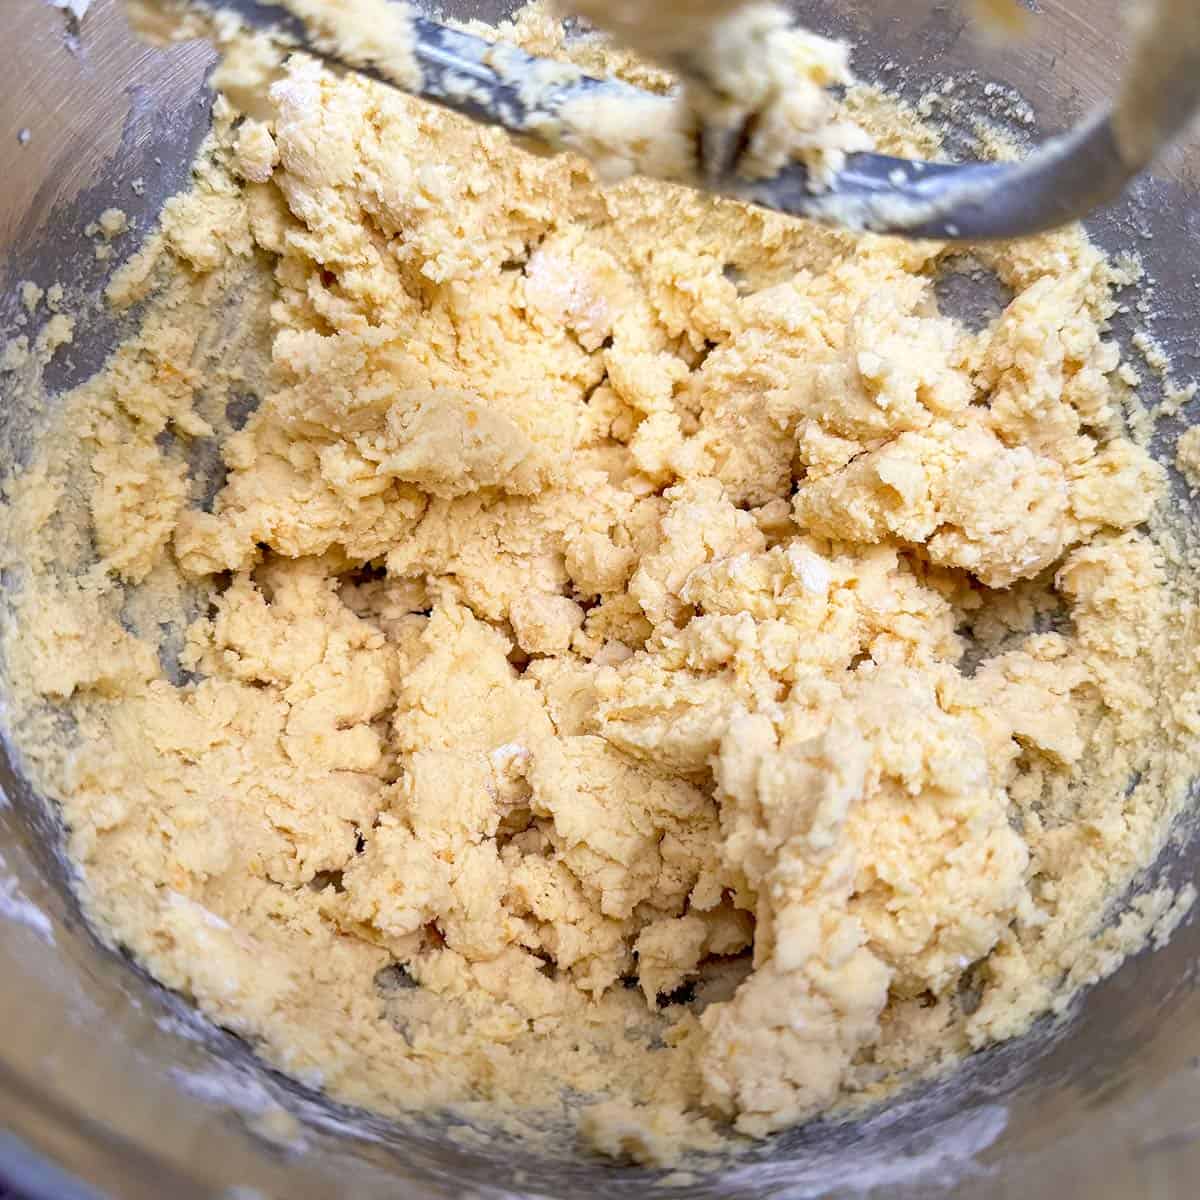 Cookie dough mixed and has the texture of playdough.